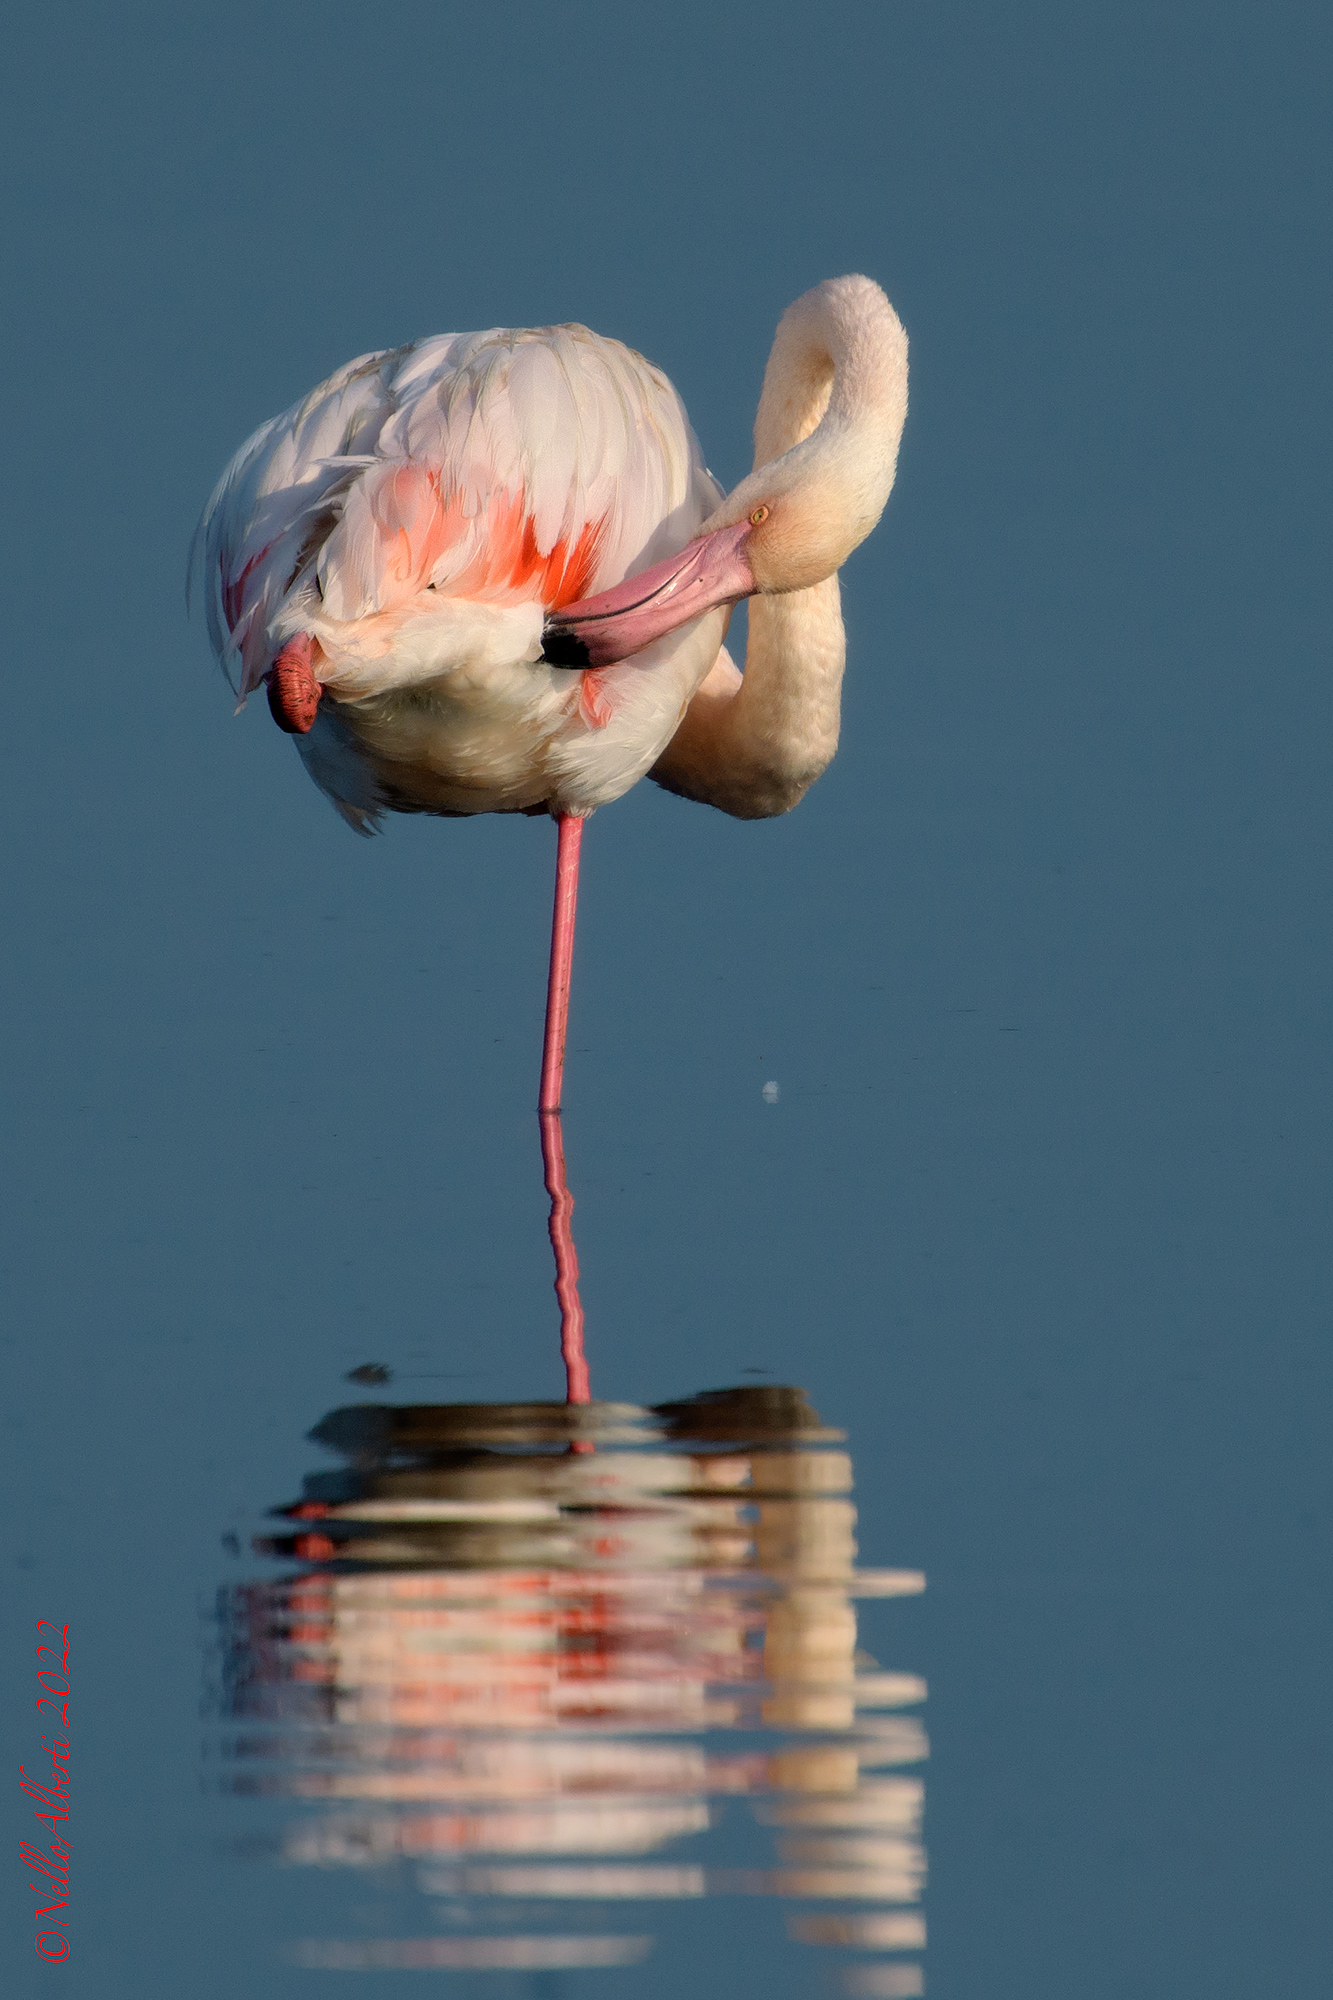 Pink flamingo in order to clean its plumage...